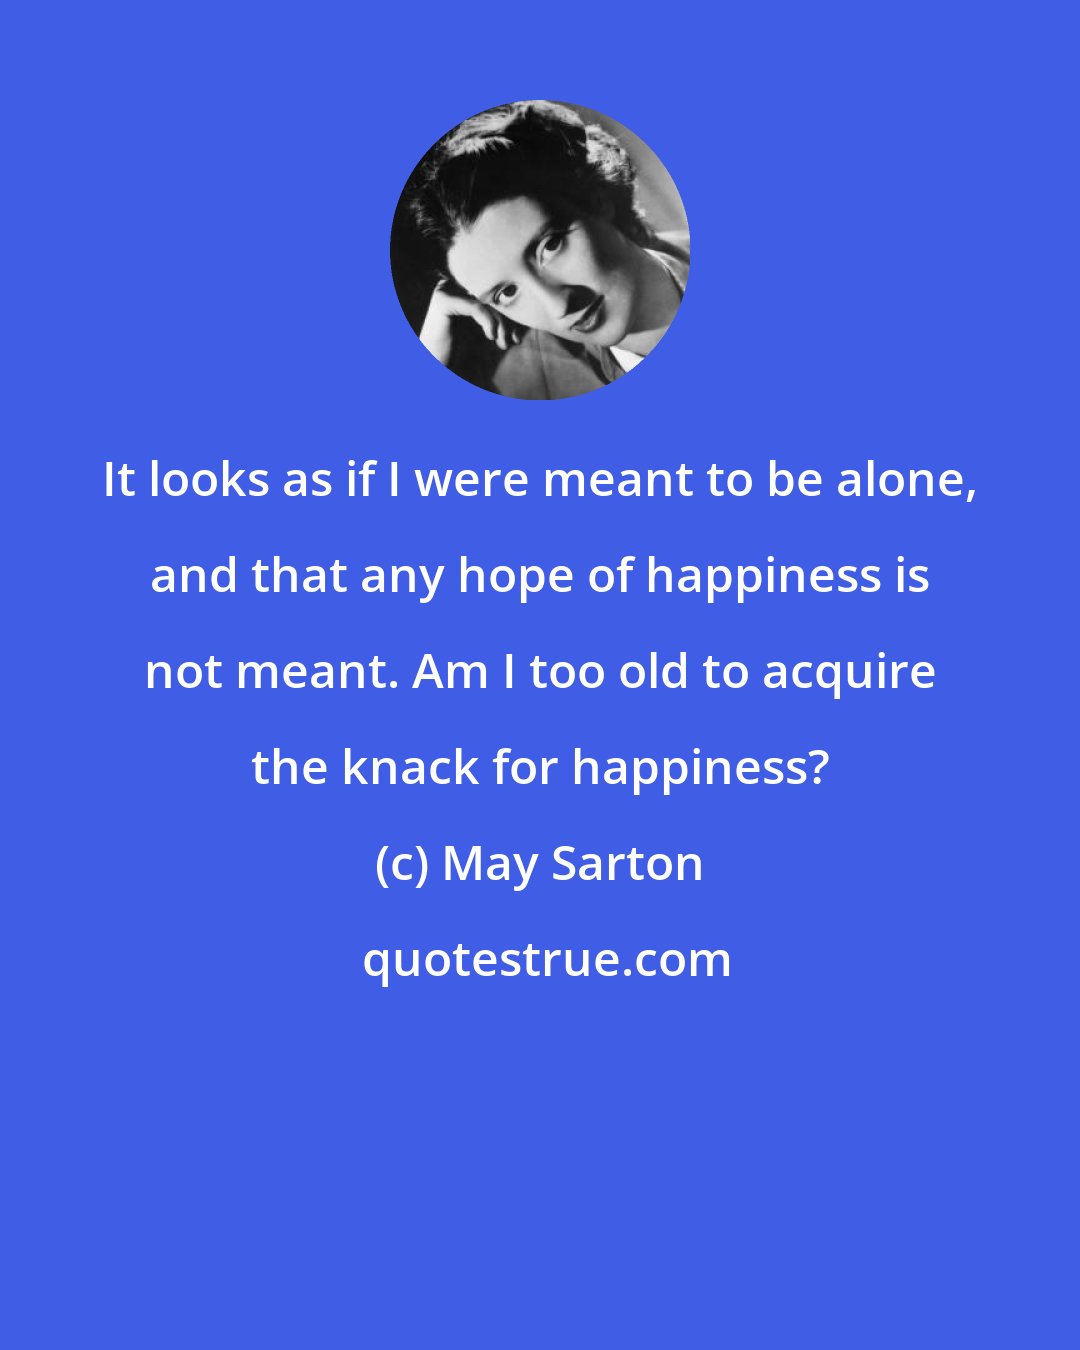 May Sarton: It looks as if I were meant to be alone, and that any hope of happiness is not meant. Am I too old to acquire the knack for happiness?